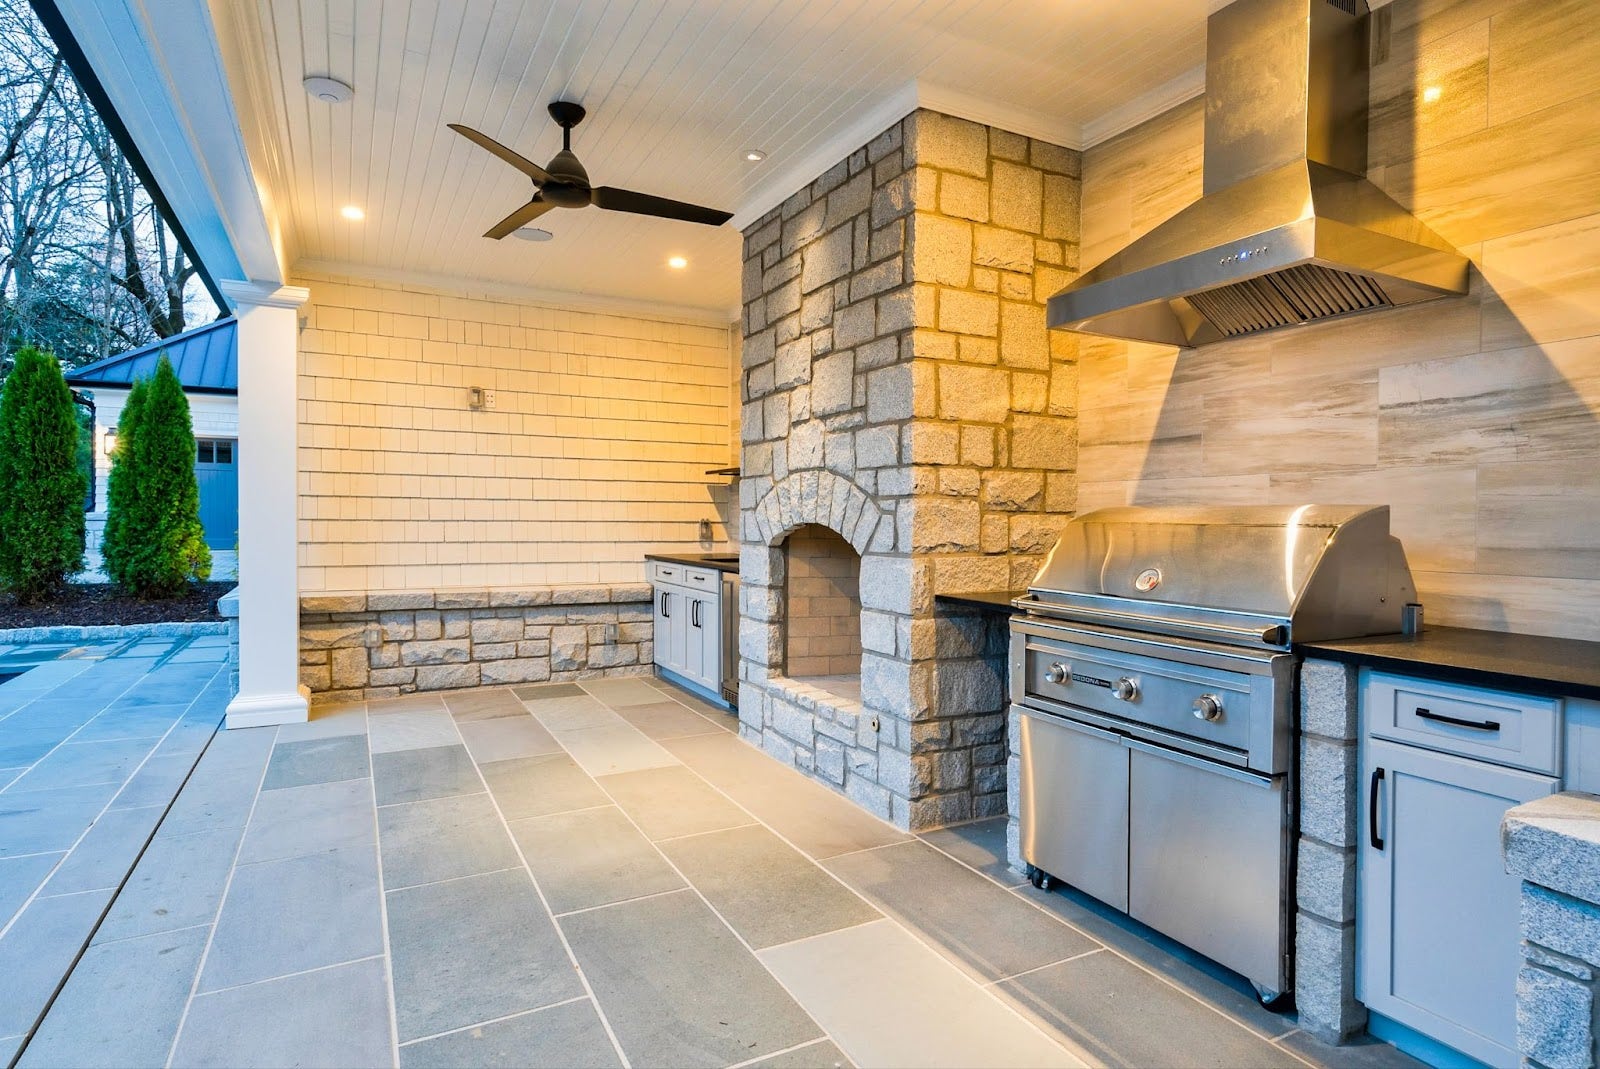 Seamless Outdoor Entertaining: Sleek Proline hood vents smoke while you cook by the pool in this inviting outdoor kitchen. Stone and stainless steel create a cohesive look, perfect for gatherings under the open sky. - Proline Range Hoods - prolinerangehoods.com 